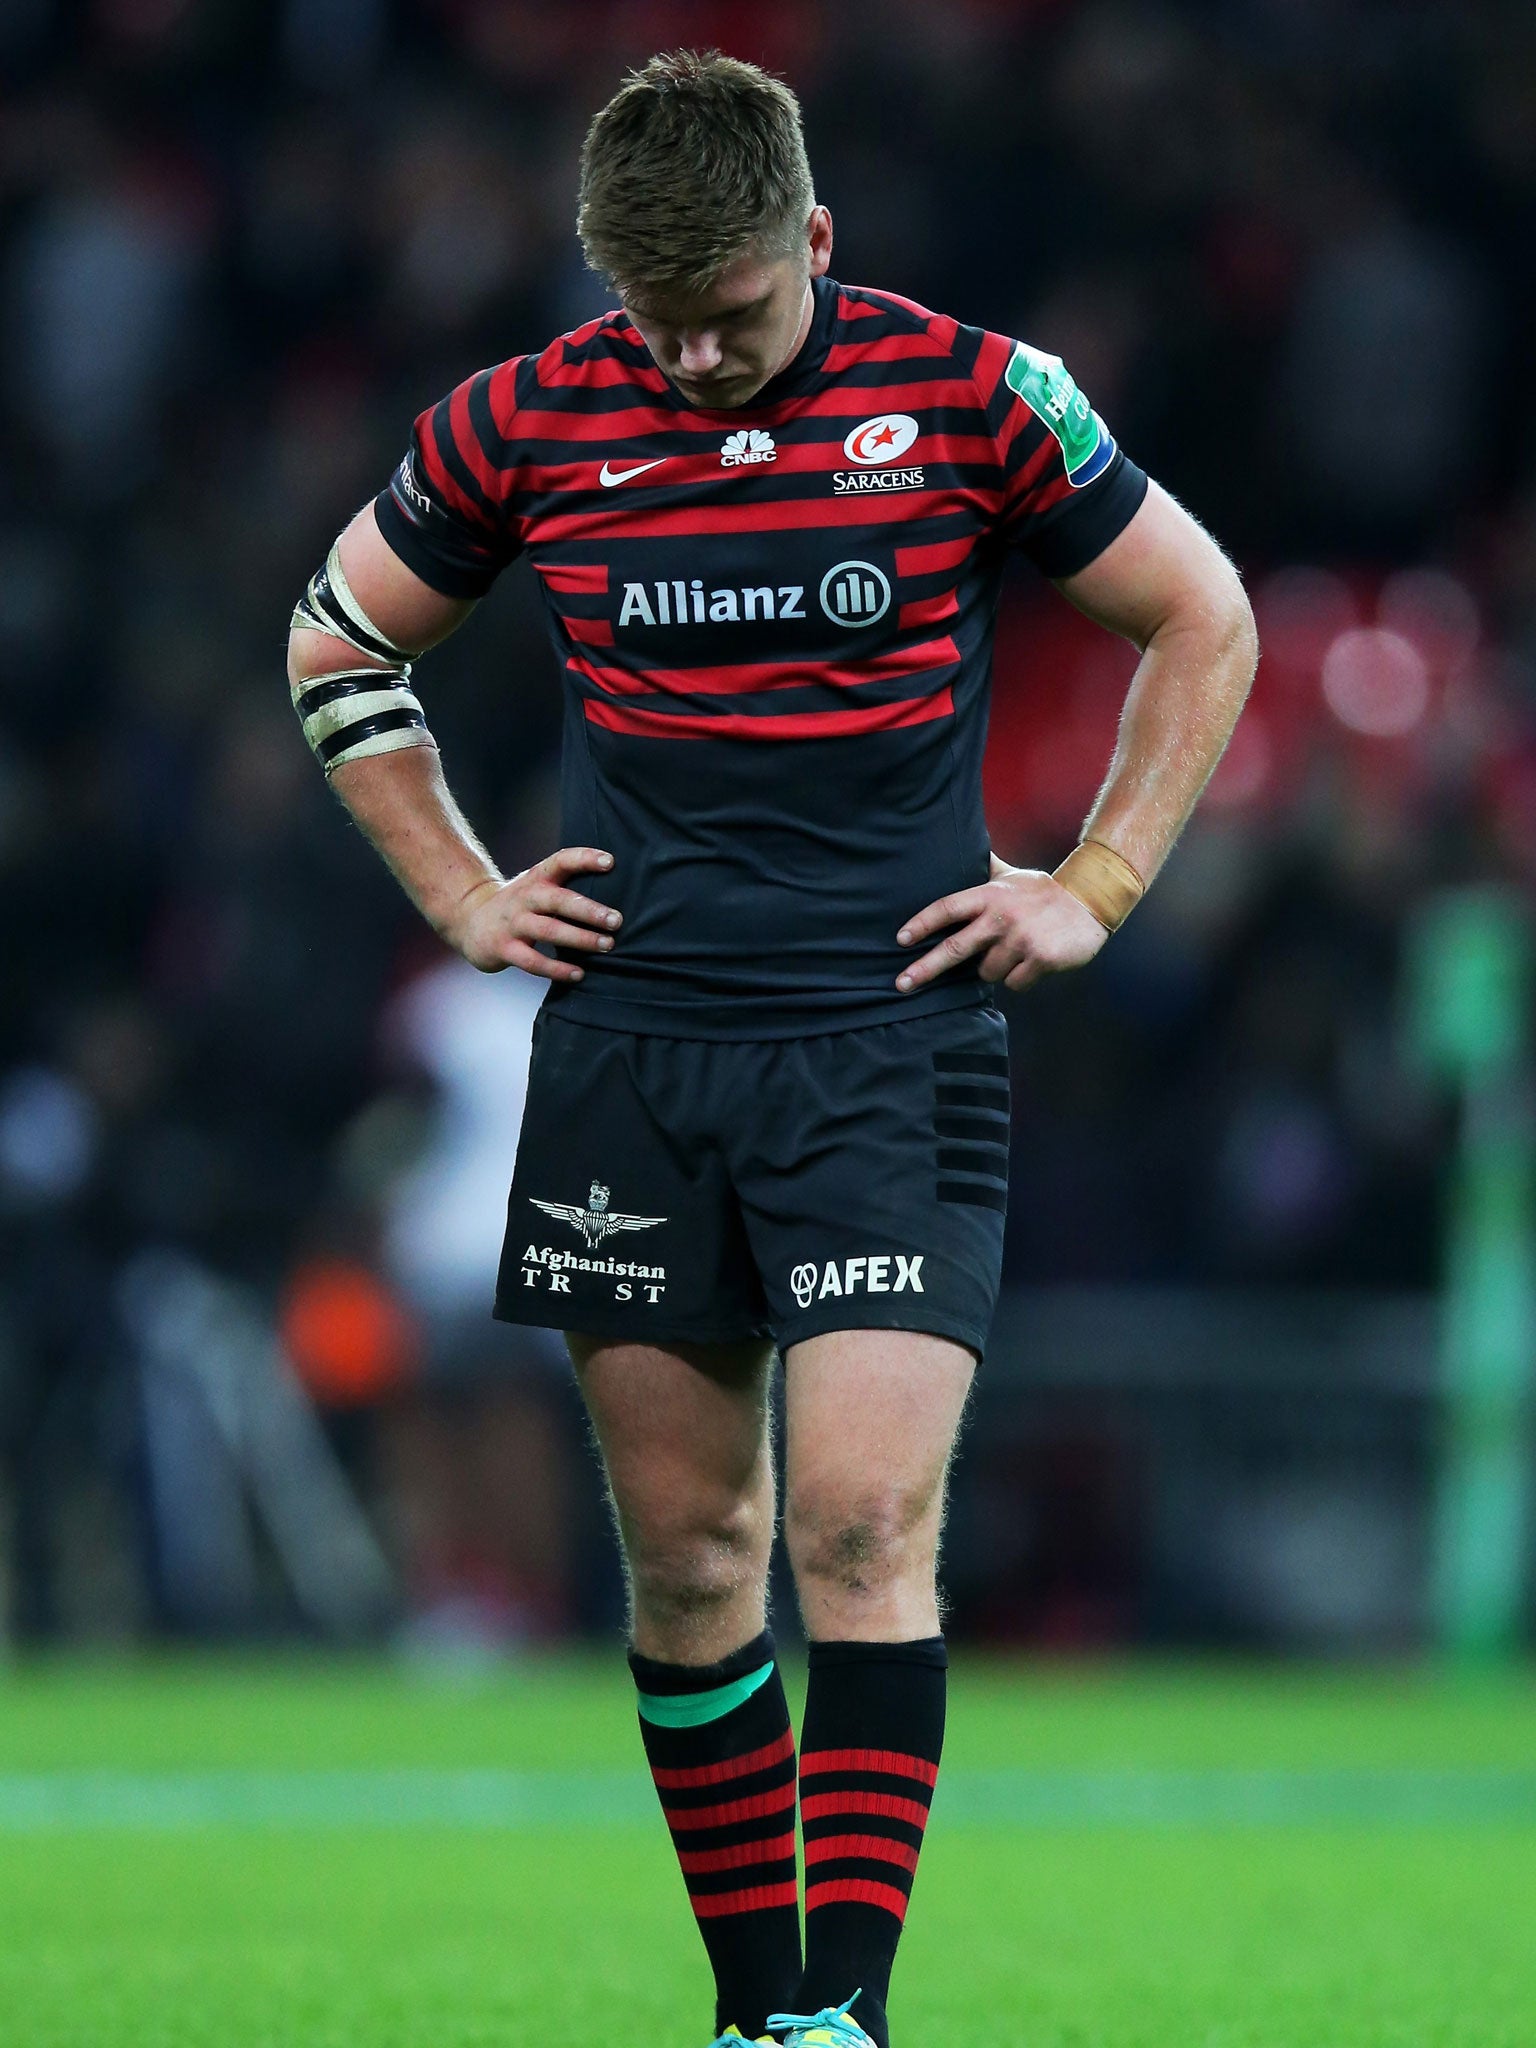 Sarries' Owen Farrell after missing a late drop-goal to win the game